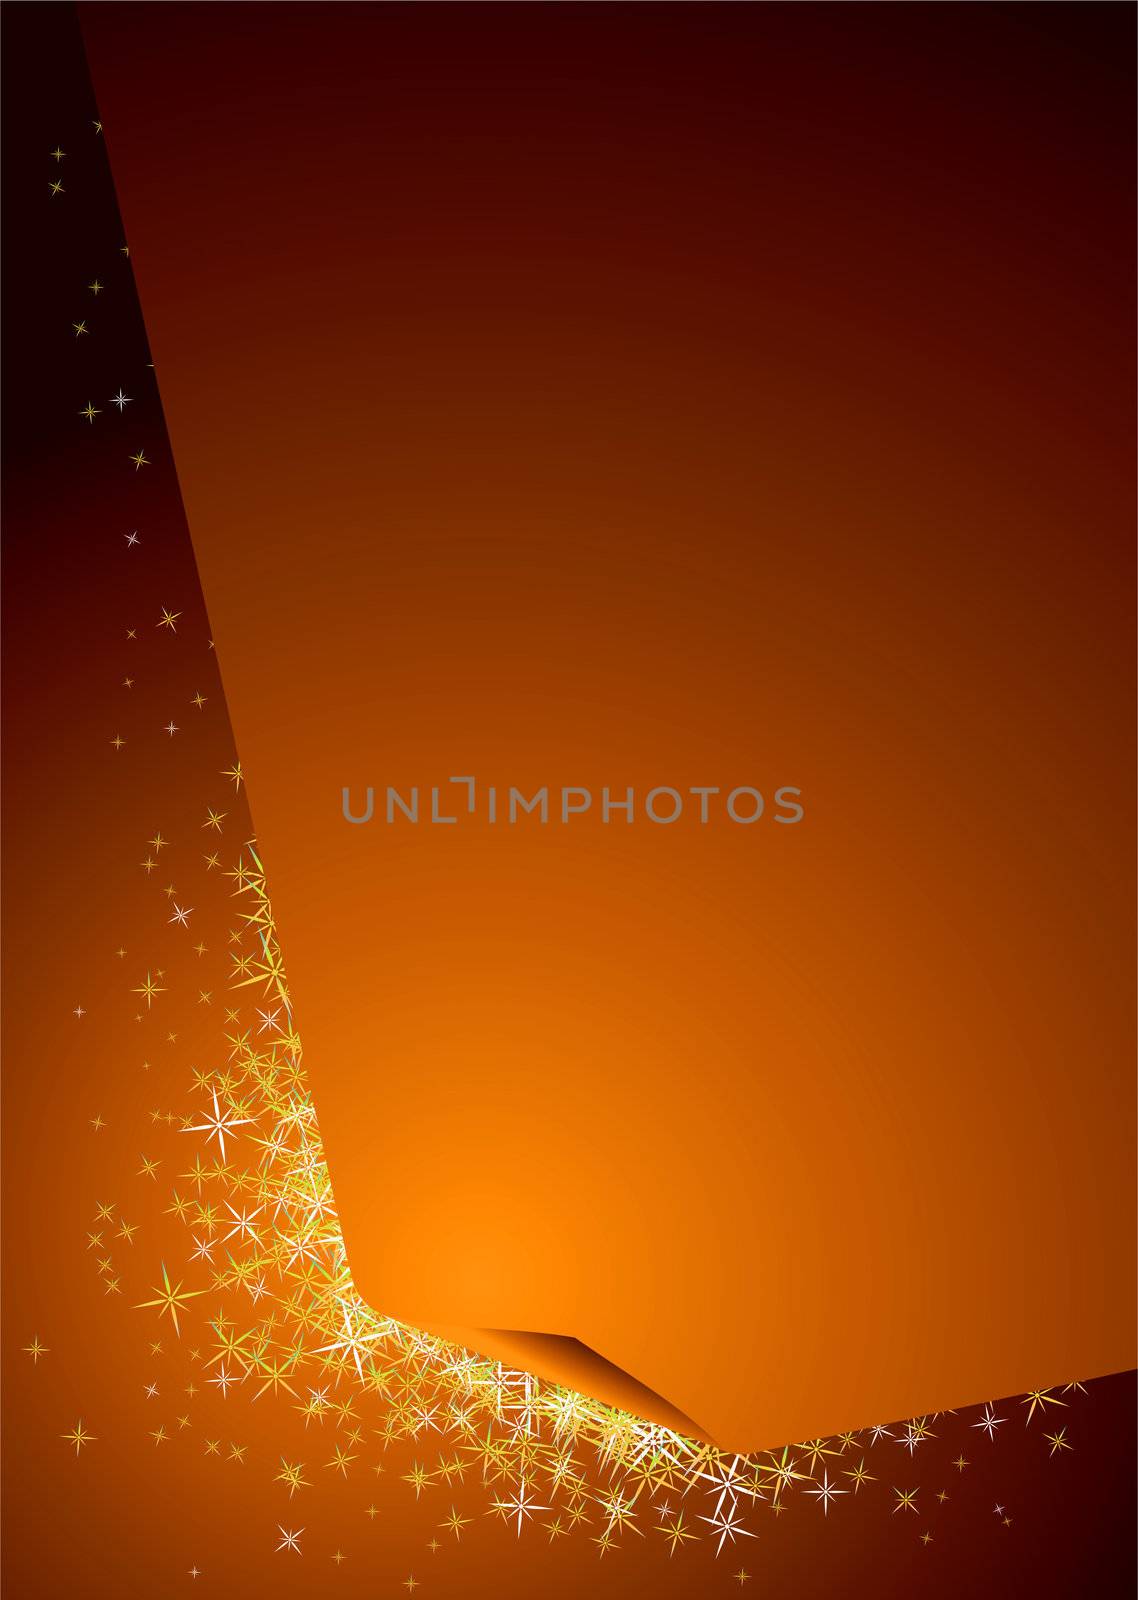 
Illustrated abstract background in orange with sparkles in white